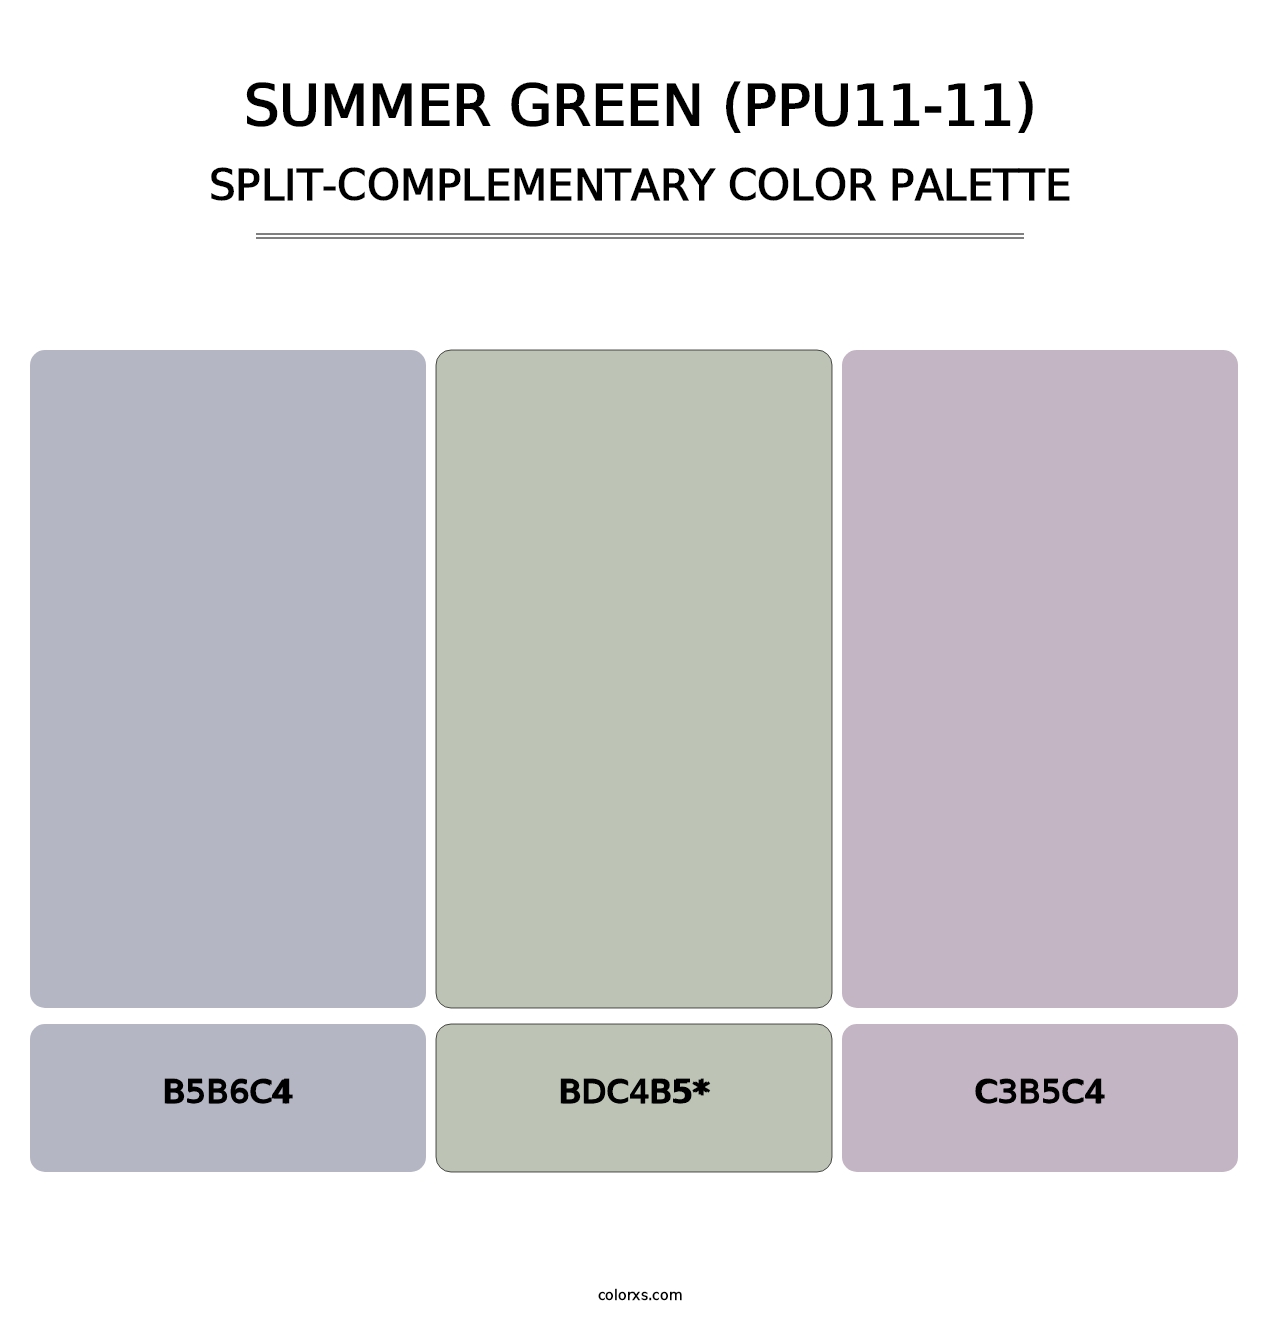 Summer Green (PPU11-11) - Split-Complementary Color Palette